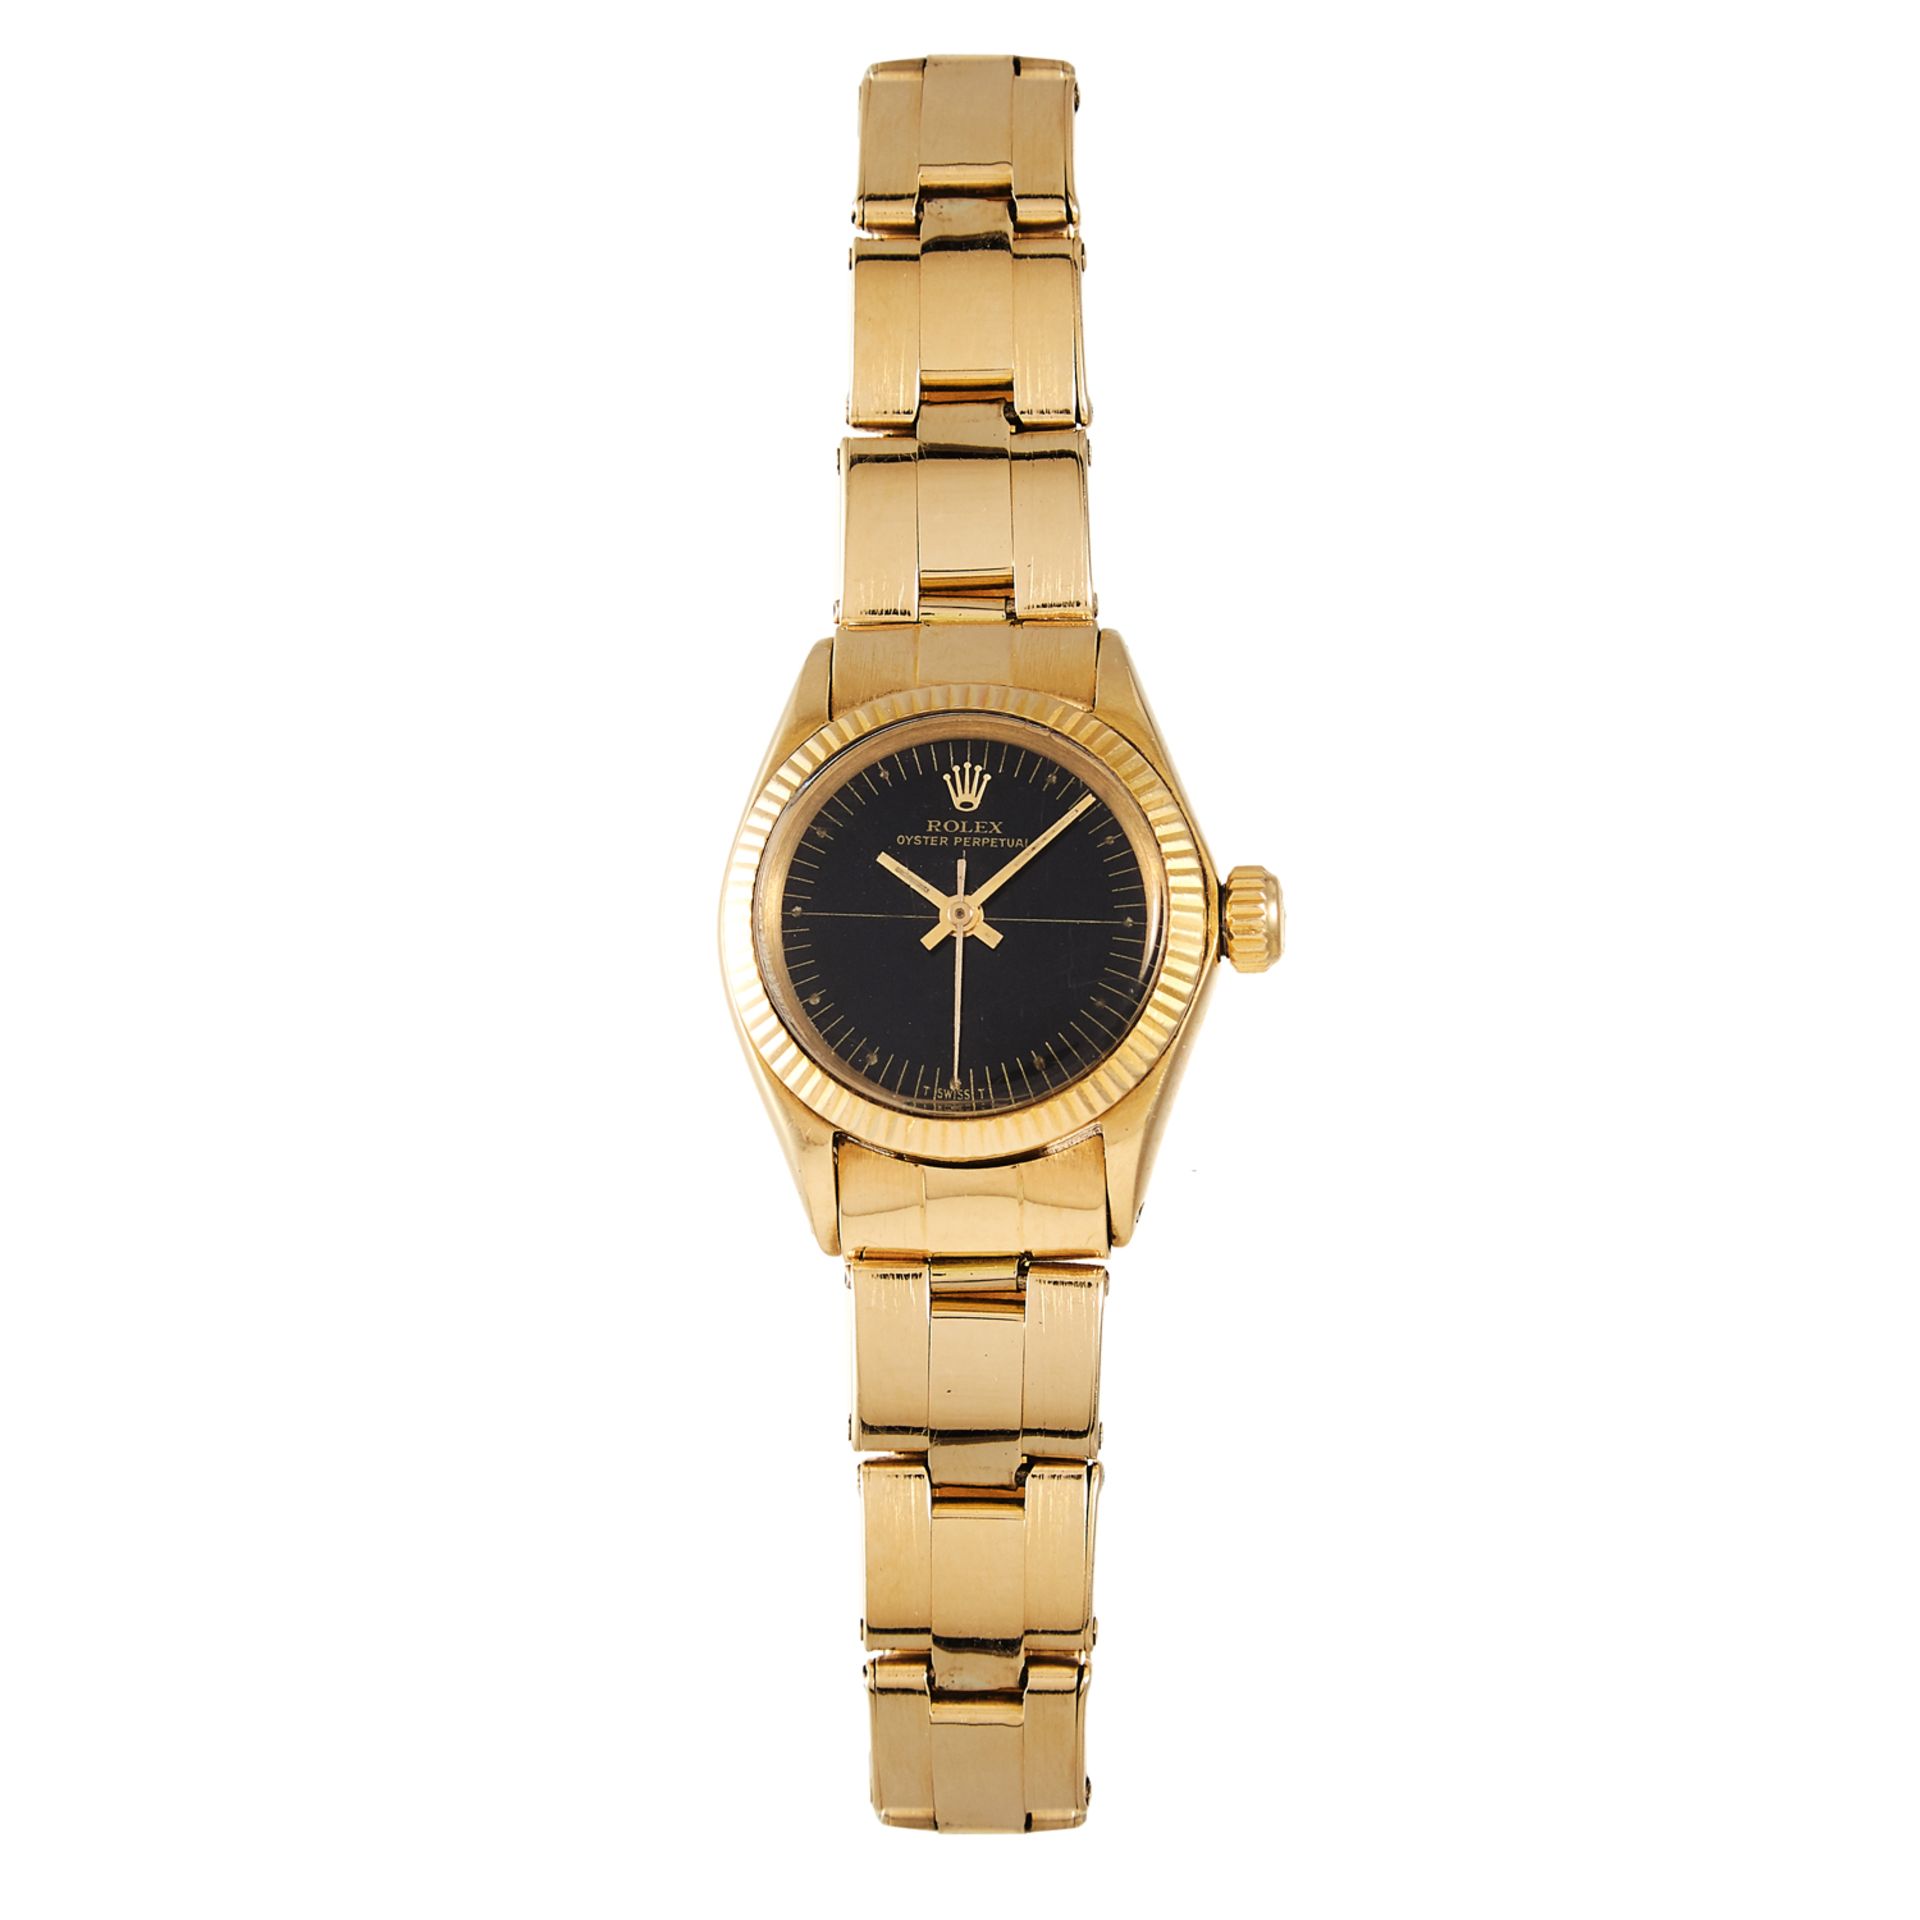 A LADIES 'OYSTER PERPETUAL' WRISTWATCH, ROLEX, CIRCA 1970 in 18ct yellow gold, with black dial,